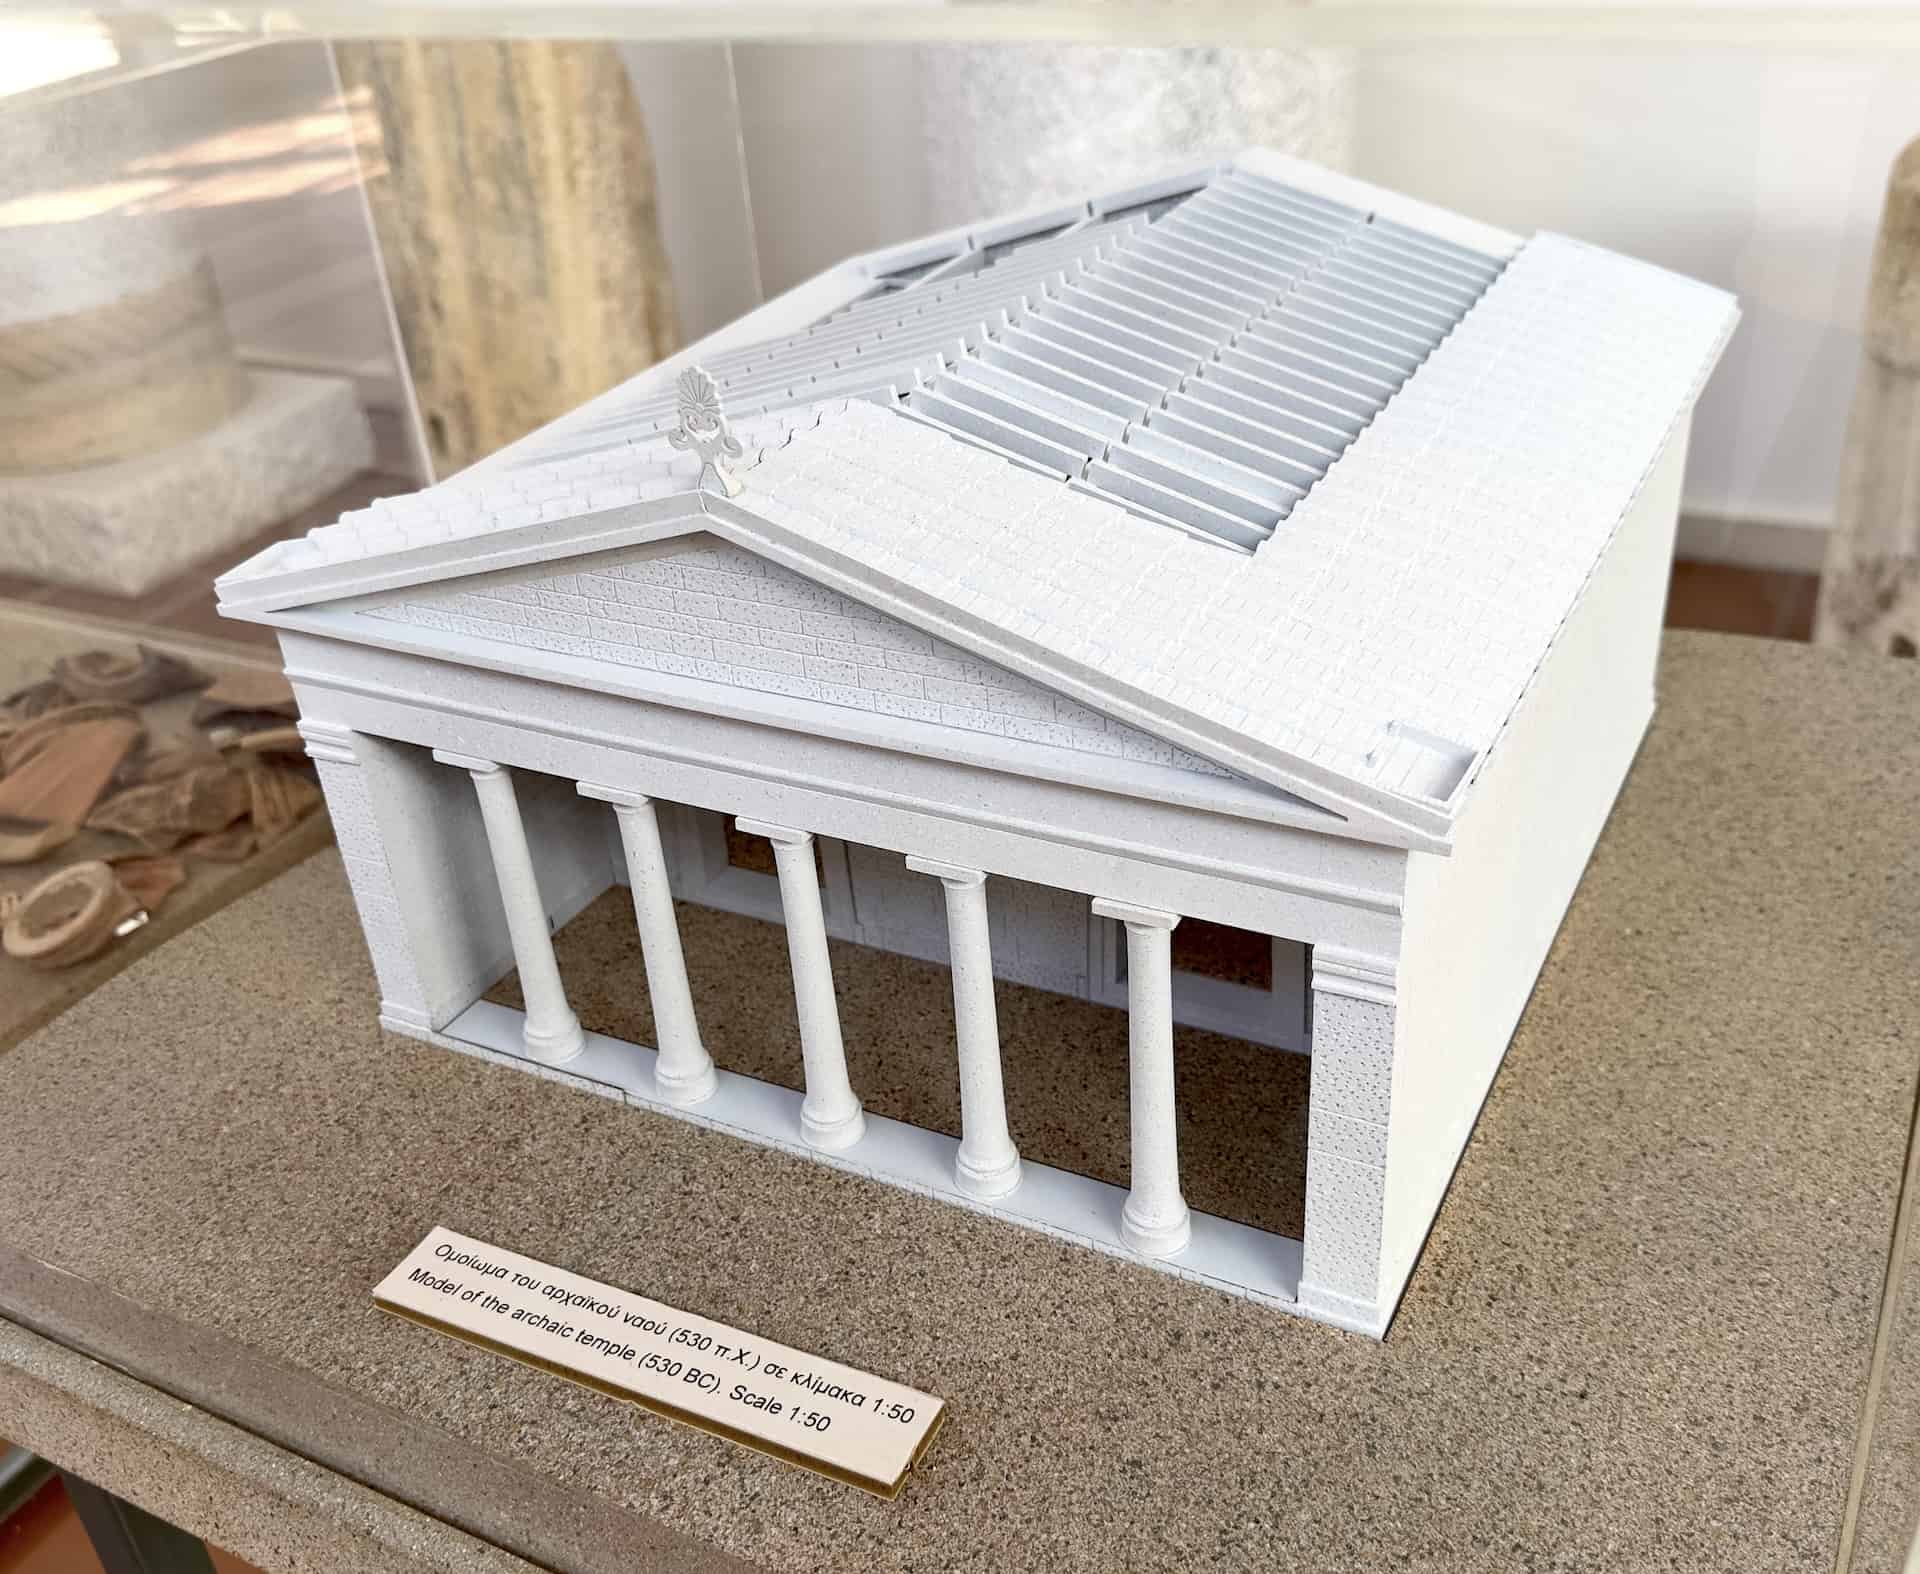 1:50 scale model of the Temple of Demeter in the museum